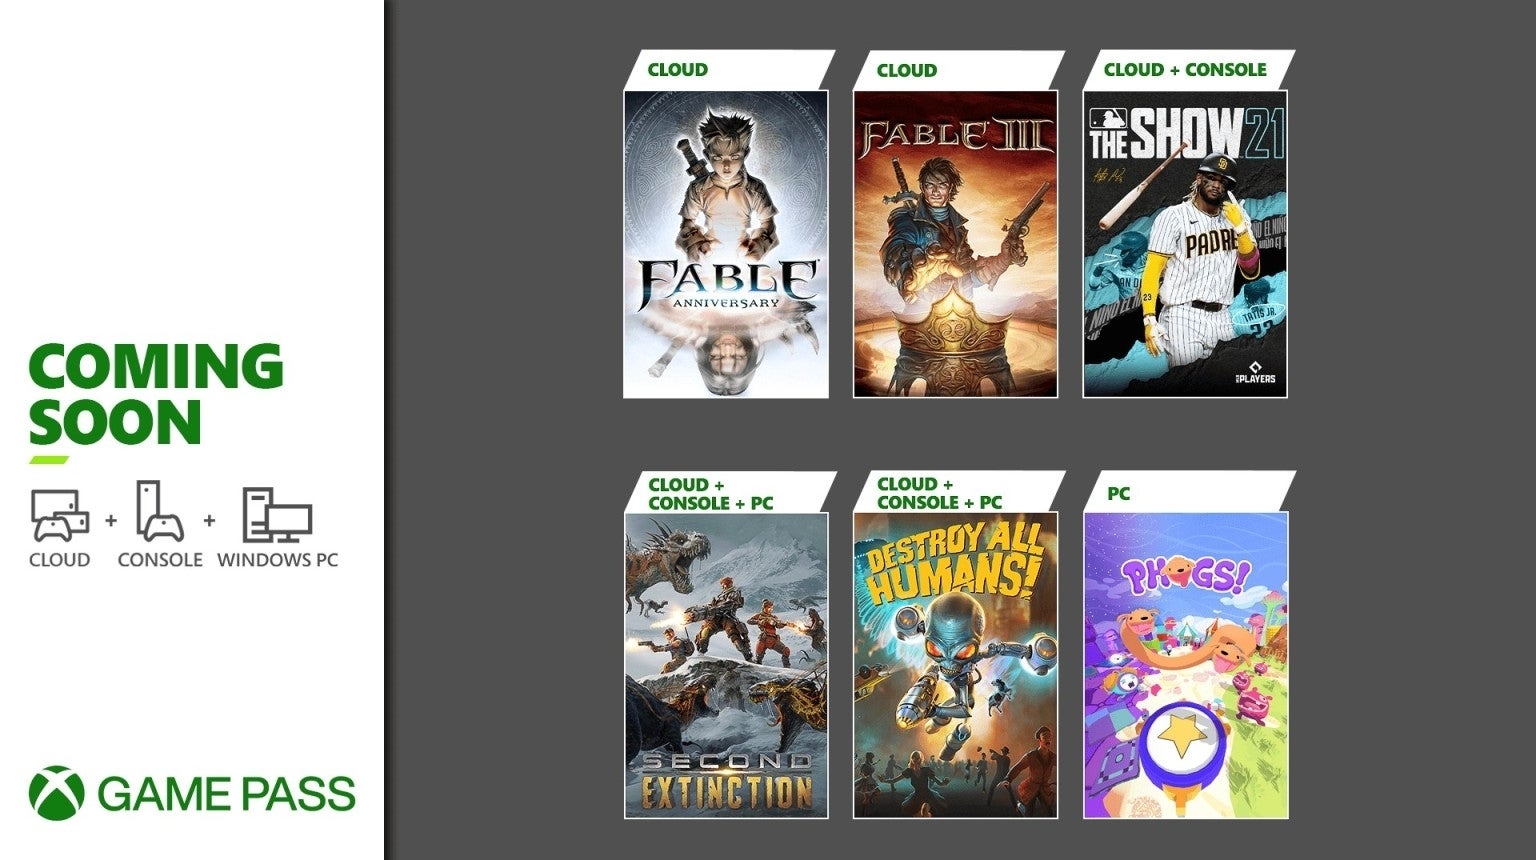 Image for Xbox Game Pass gets Phogs!, Second Extinction, Destroy All Humans! and more soon